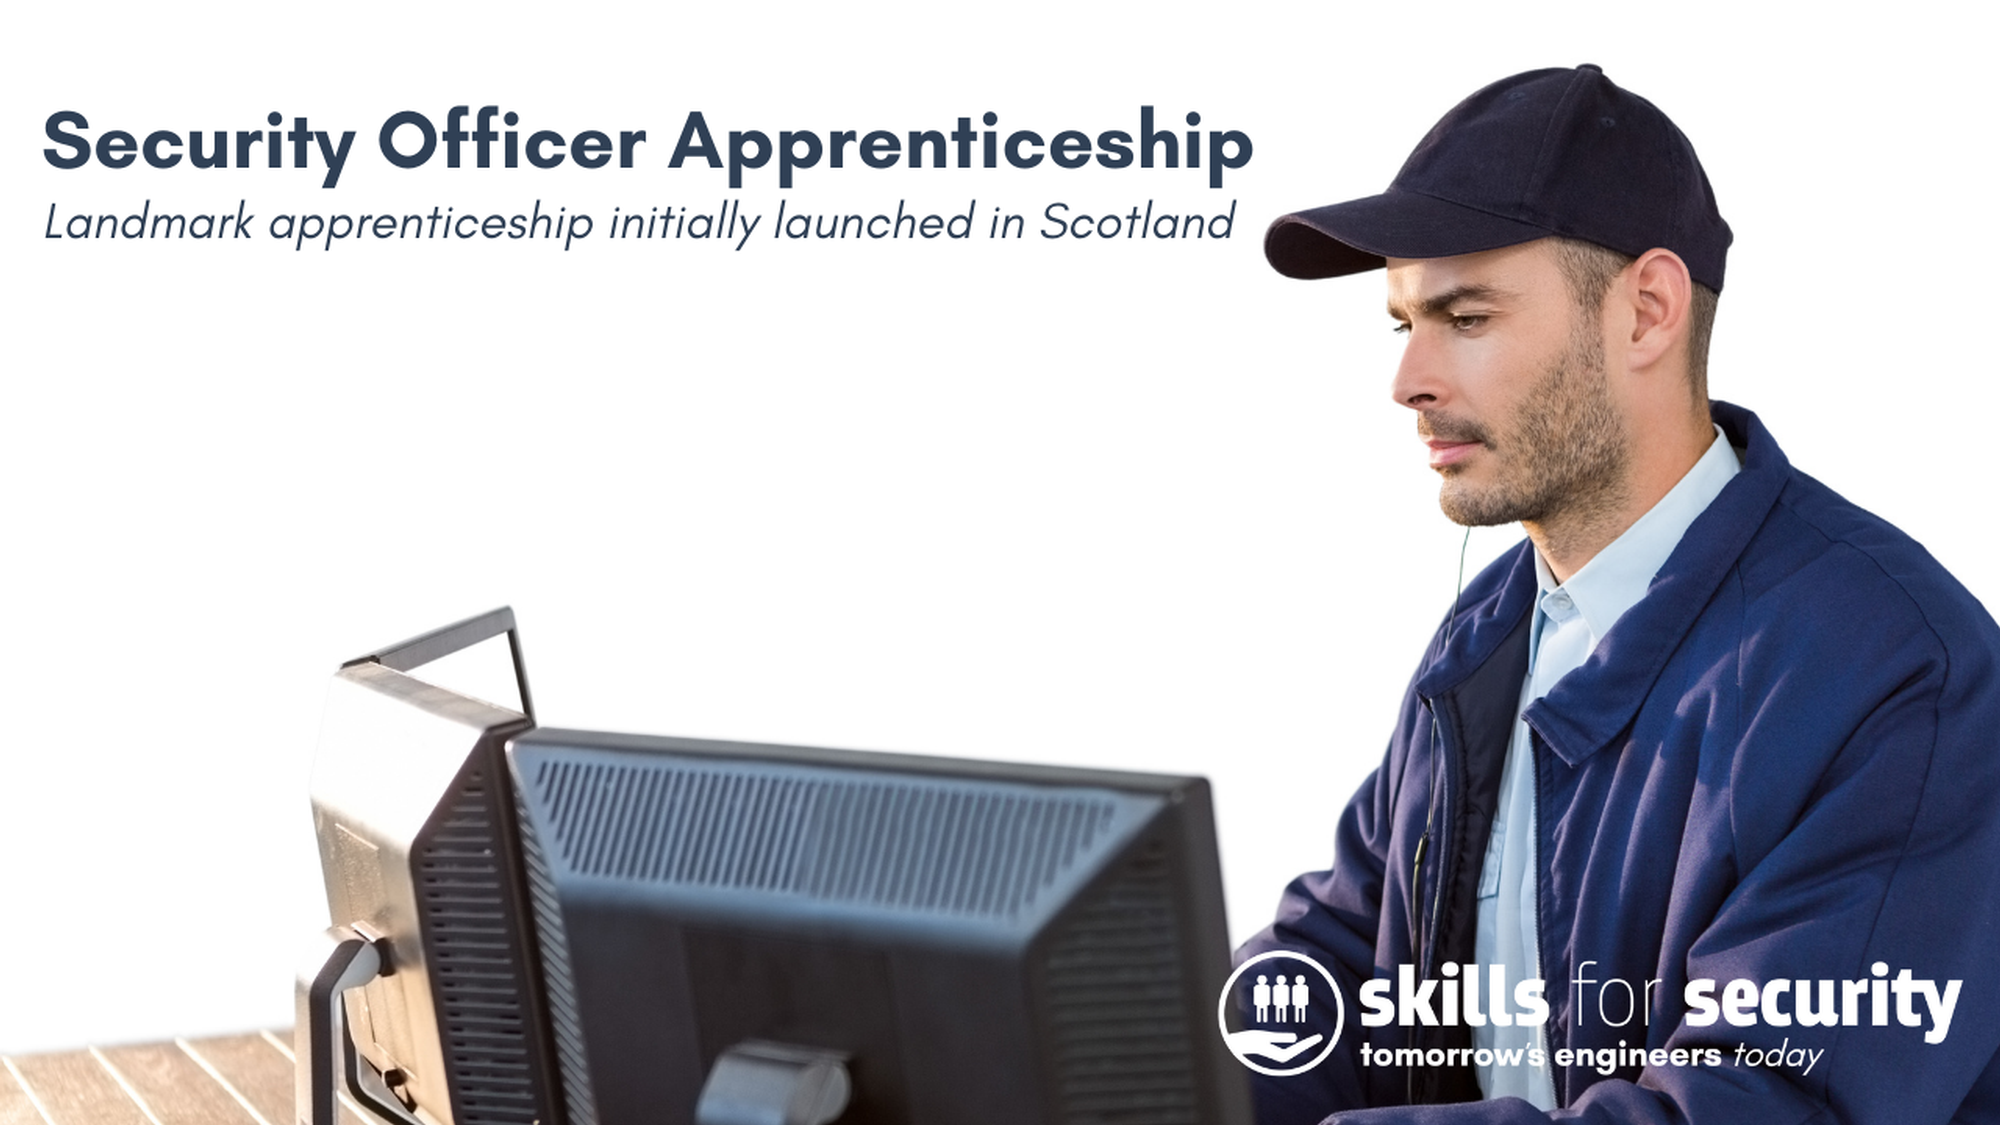 SECURITY OFFICER SERVICES APPRENTICESHIP SCOTLAND RECEIVES APPROVAL TO LAUNCH